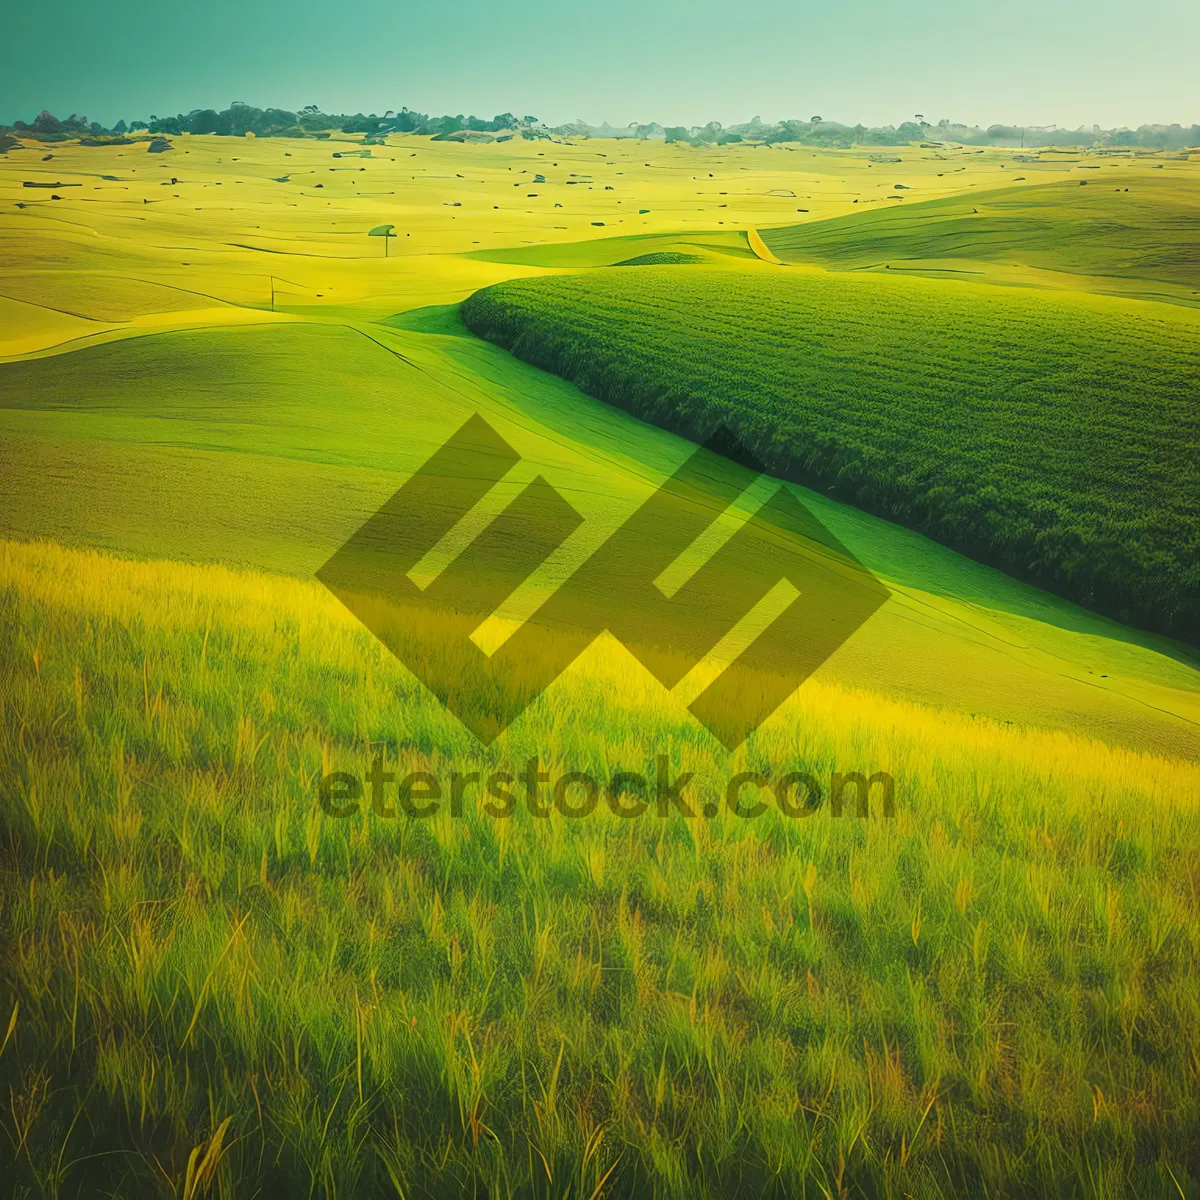 Picture of Golden Harvest: A Scenic Autumn Landscape with Rolling Hills